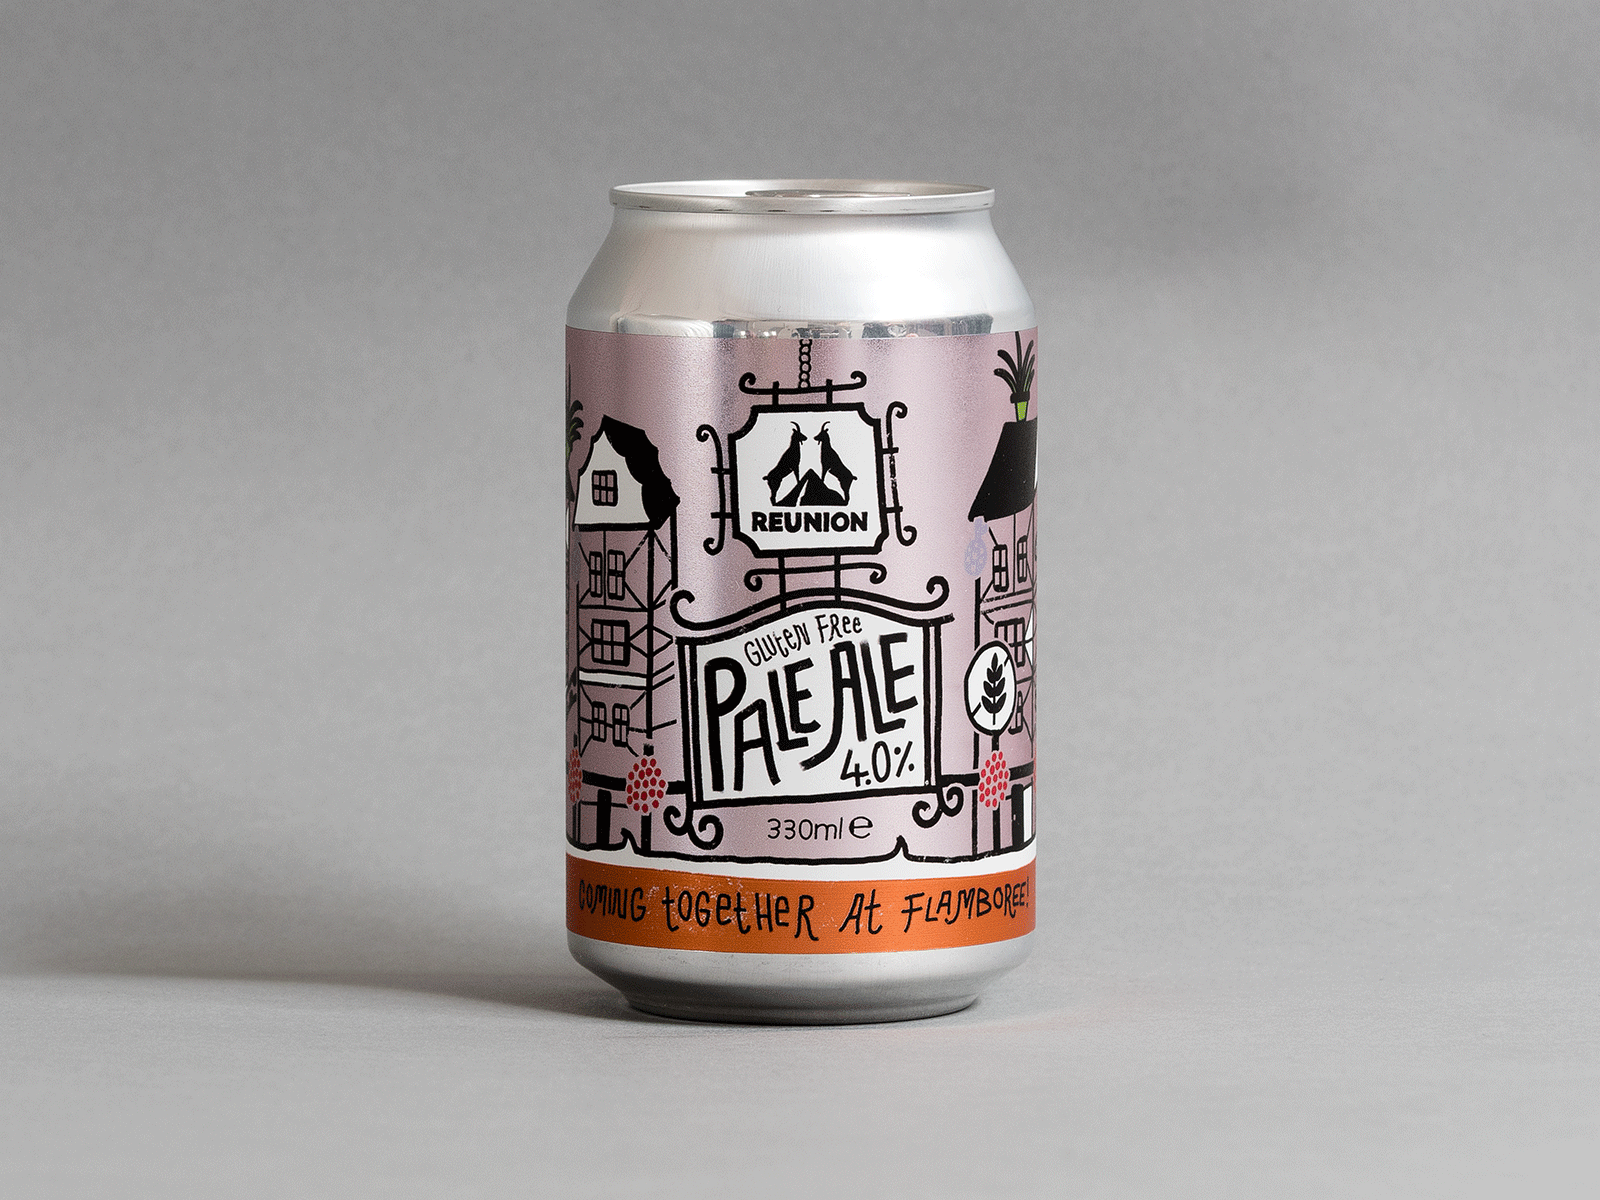 finished work: Reunion Ales x Flamboree! beer cans agency alcohol alcohol branding alcohol packaging beer beer branding beer can beer design beer label collaboration design graphic design illustration packaging packaging design packaging designer packaging illustration pastels restaurant restaurant branding